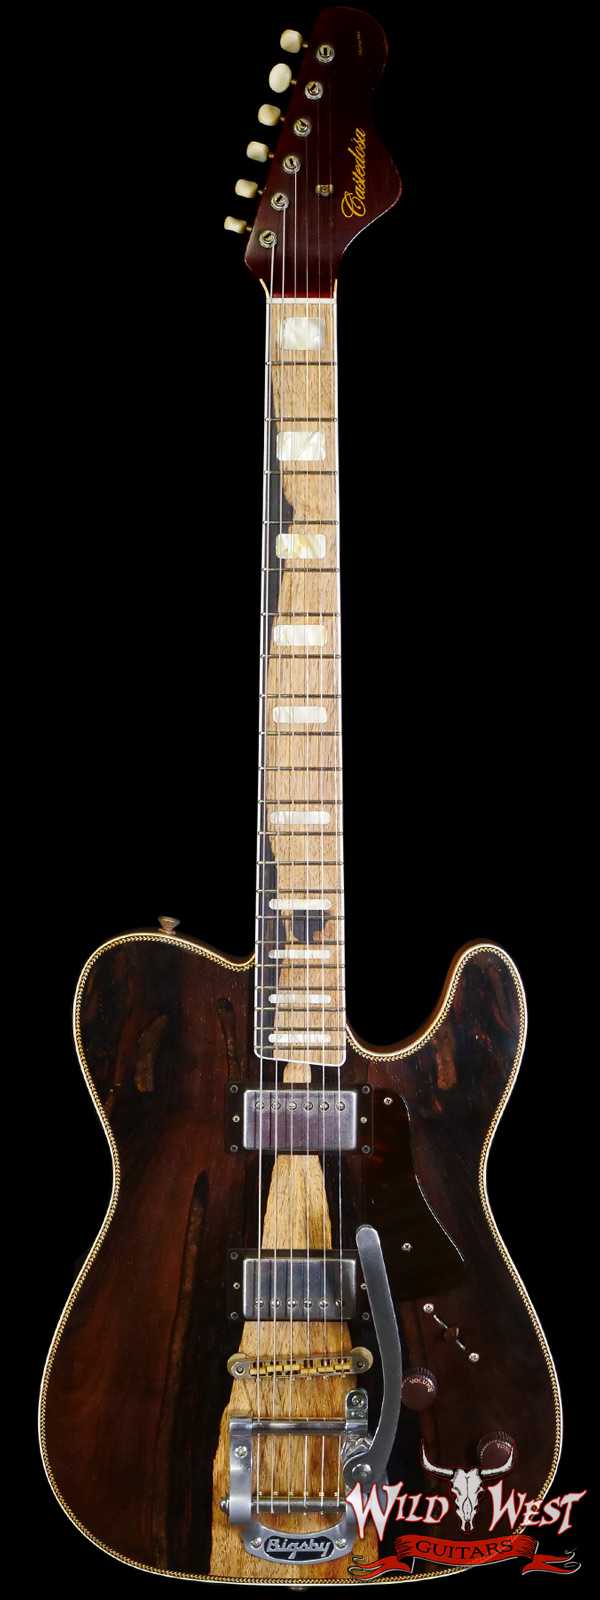 Castedosa Guitars Marianna Custom Brazilian Rosewood Top and Fingerboard Relic & Built by Carlos Lopez